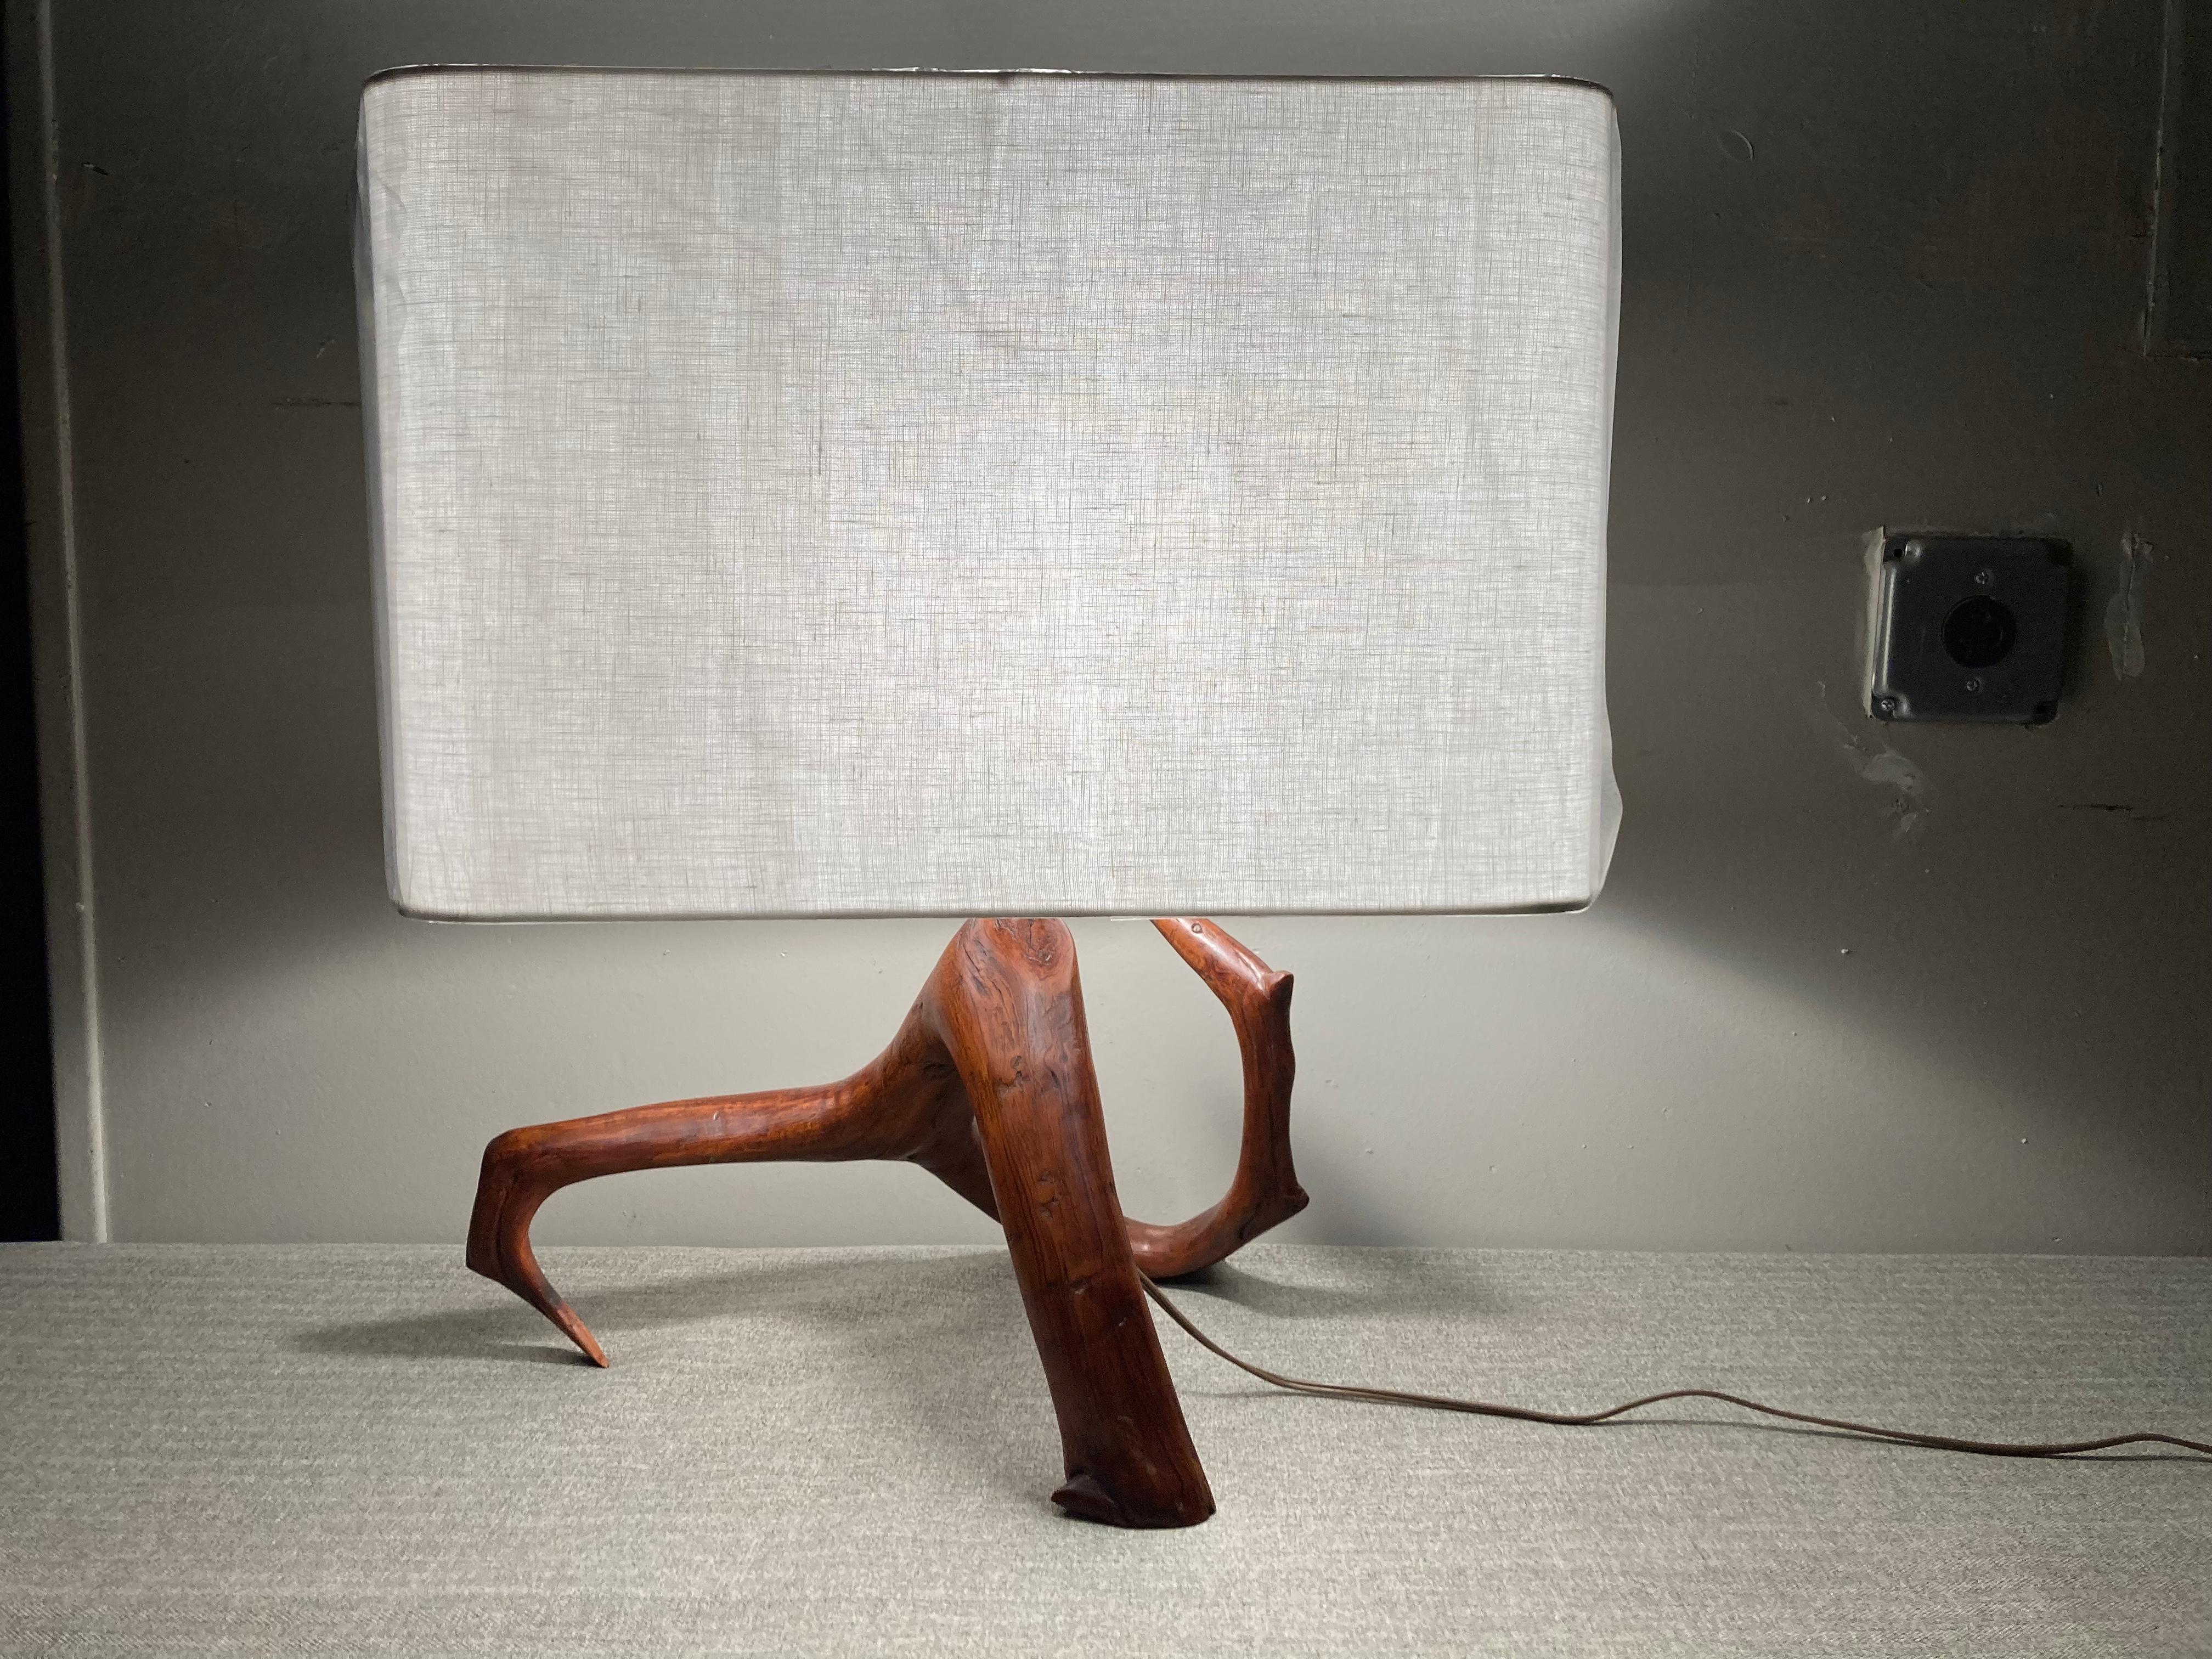 Beautiful table lamp, hardware and shade are new.